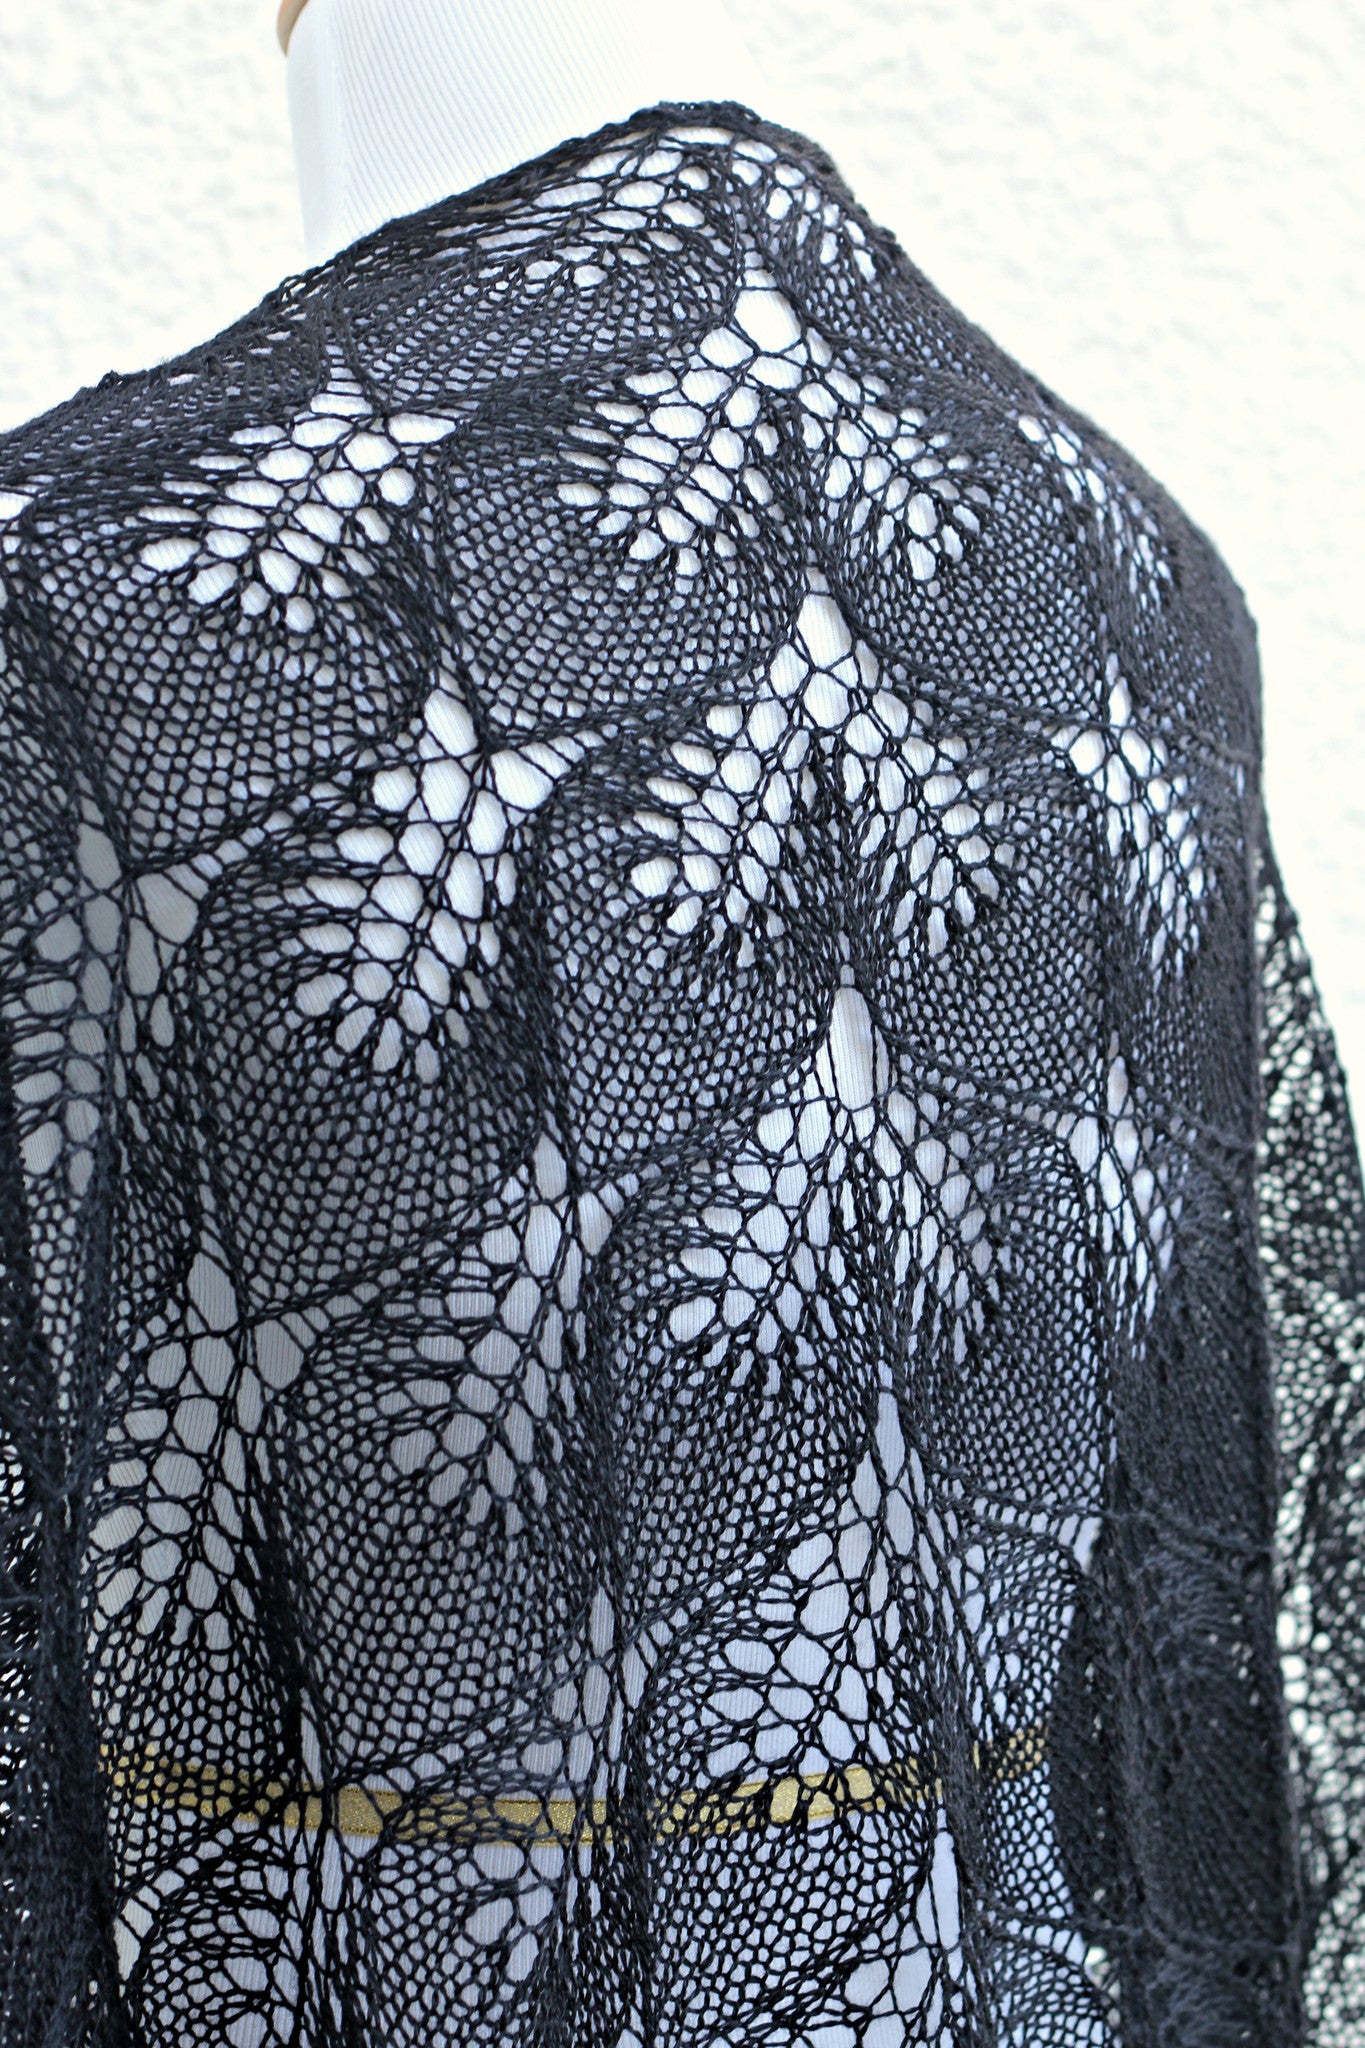 Knit shawl in black lace, knitted shawl, gift for her